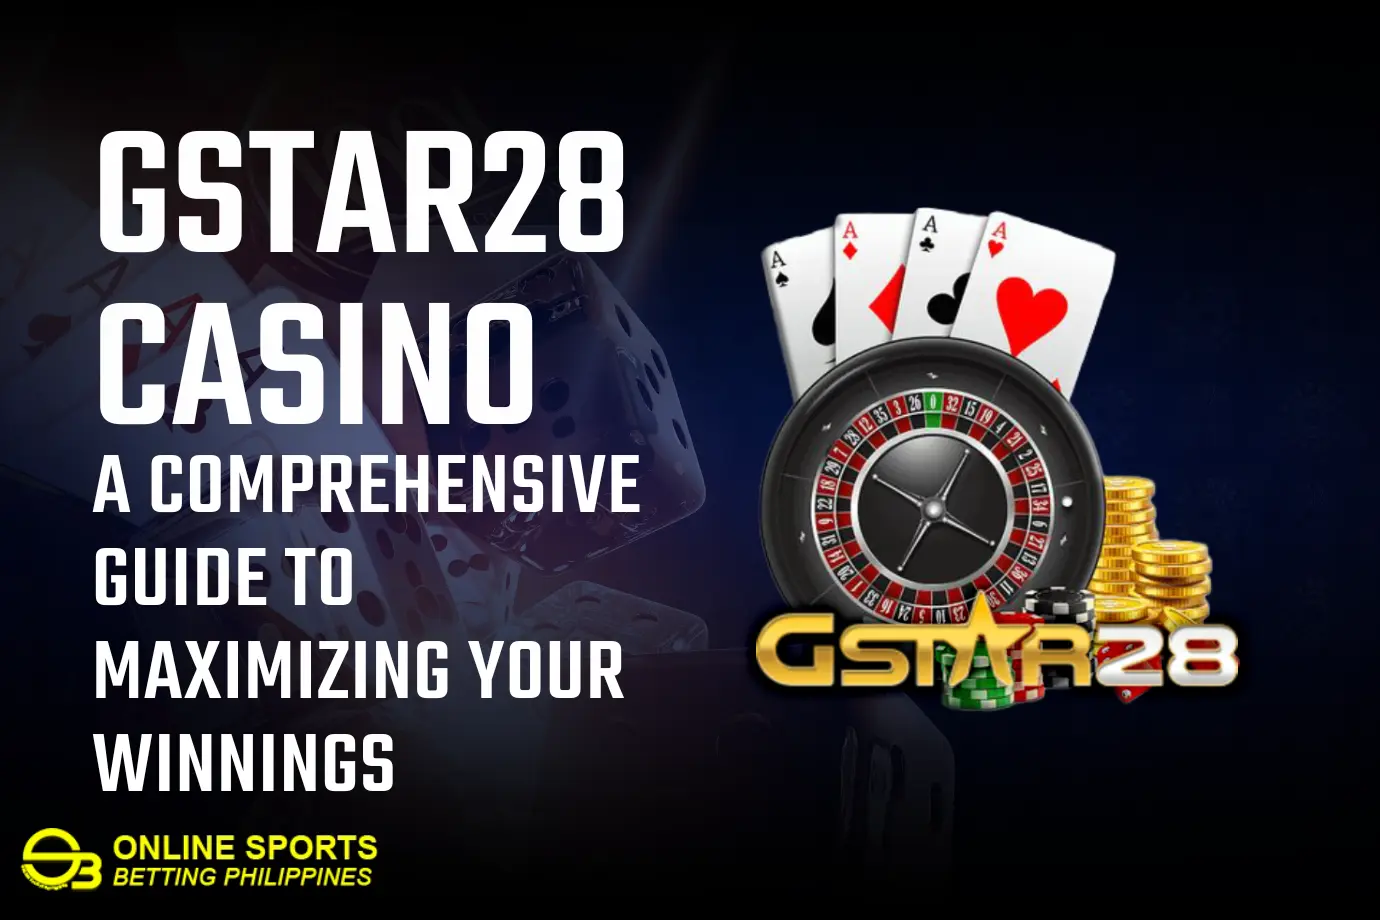 Gstar28 Casino: A Comprehensive Guide to Maximizing Your Winnings